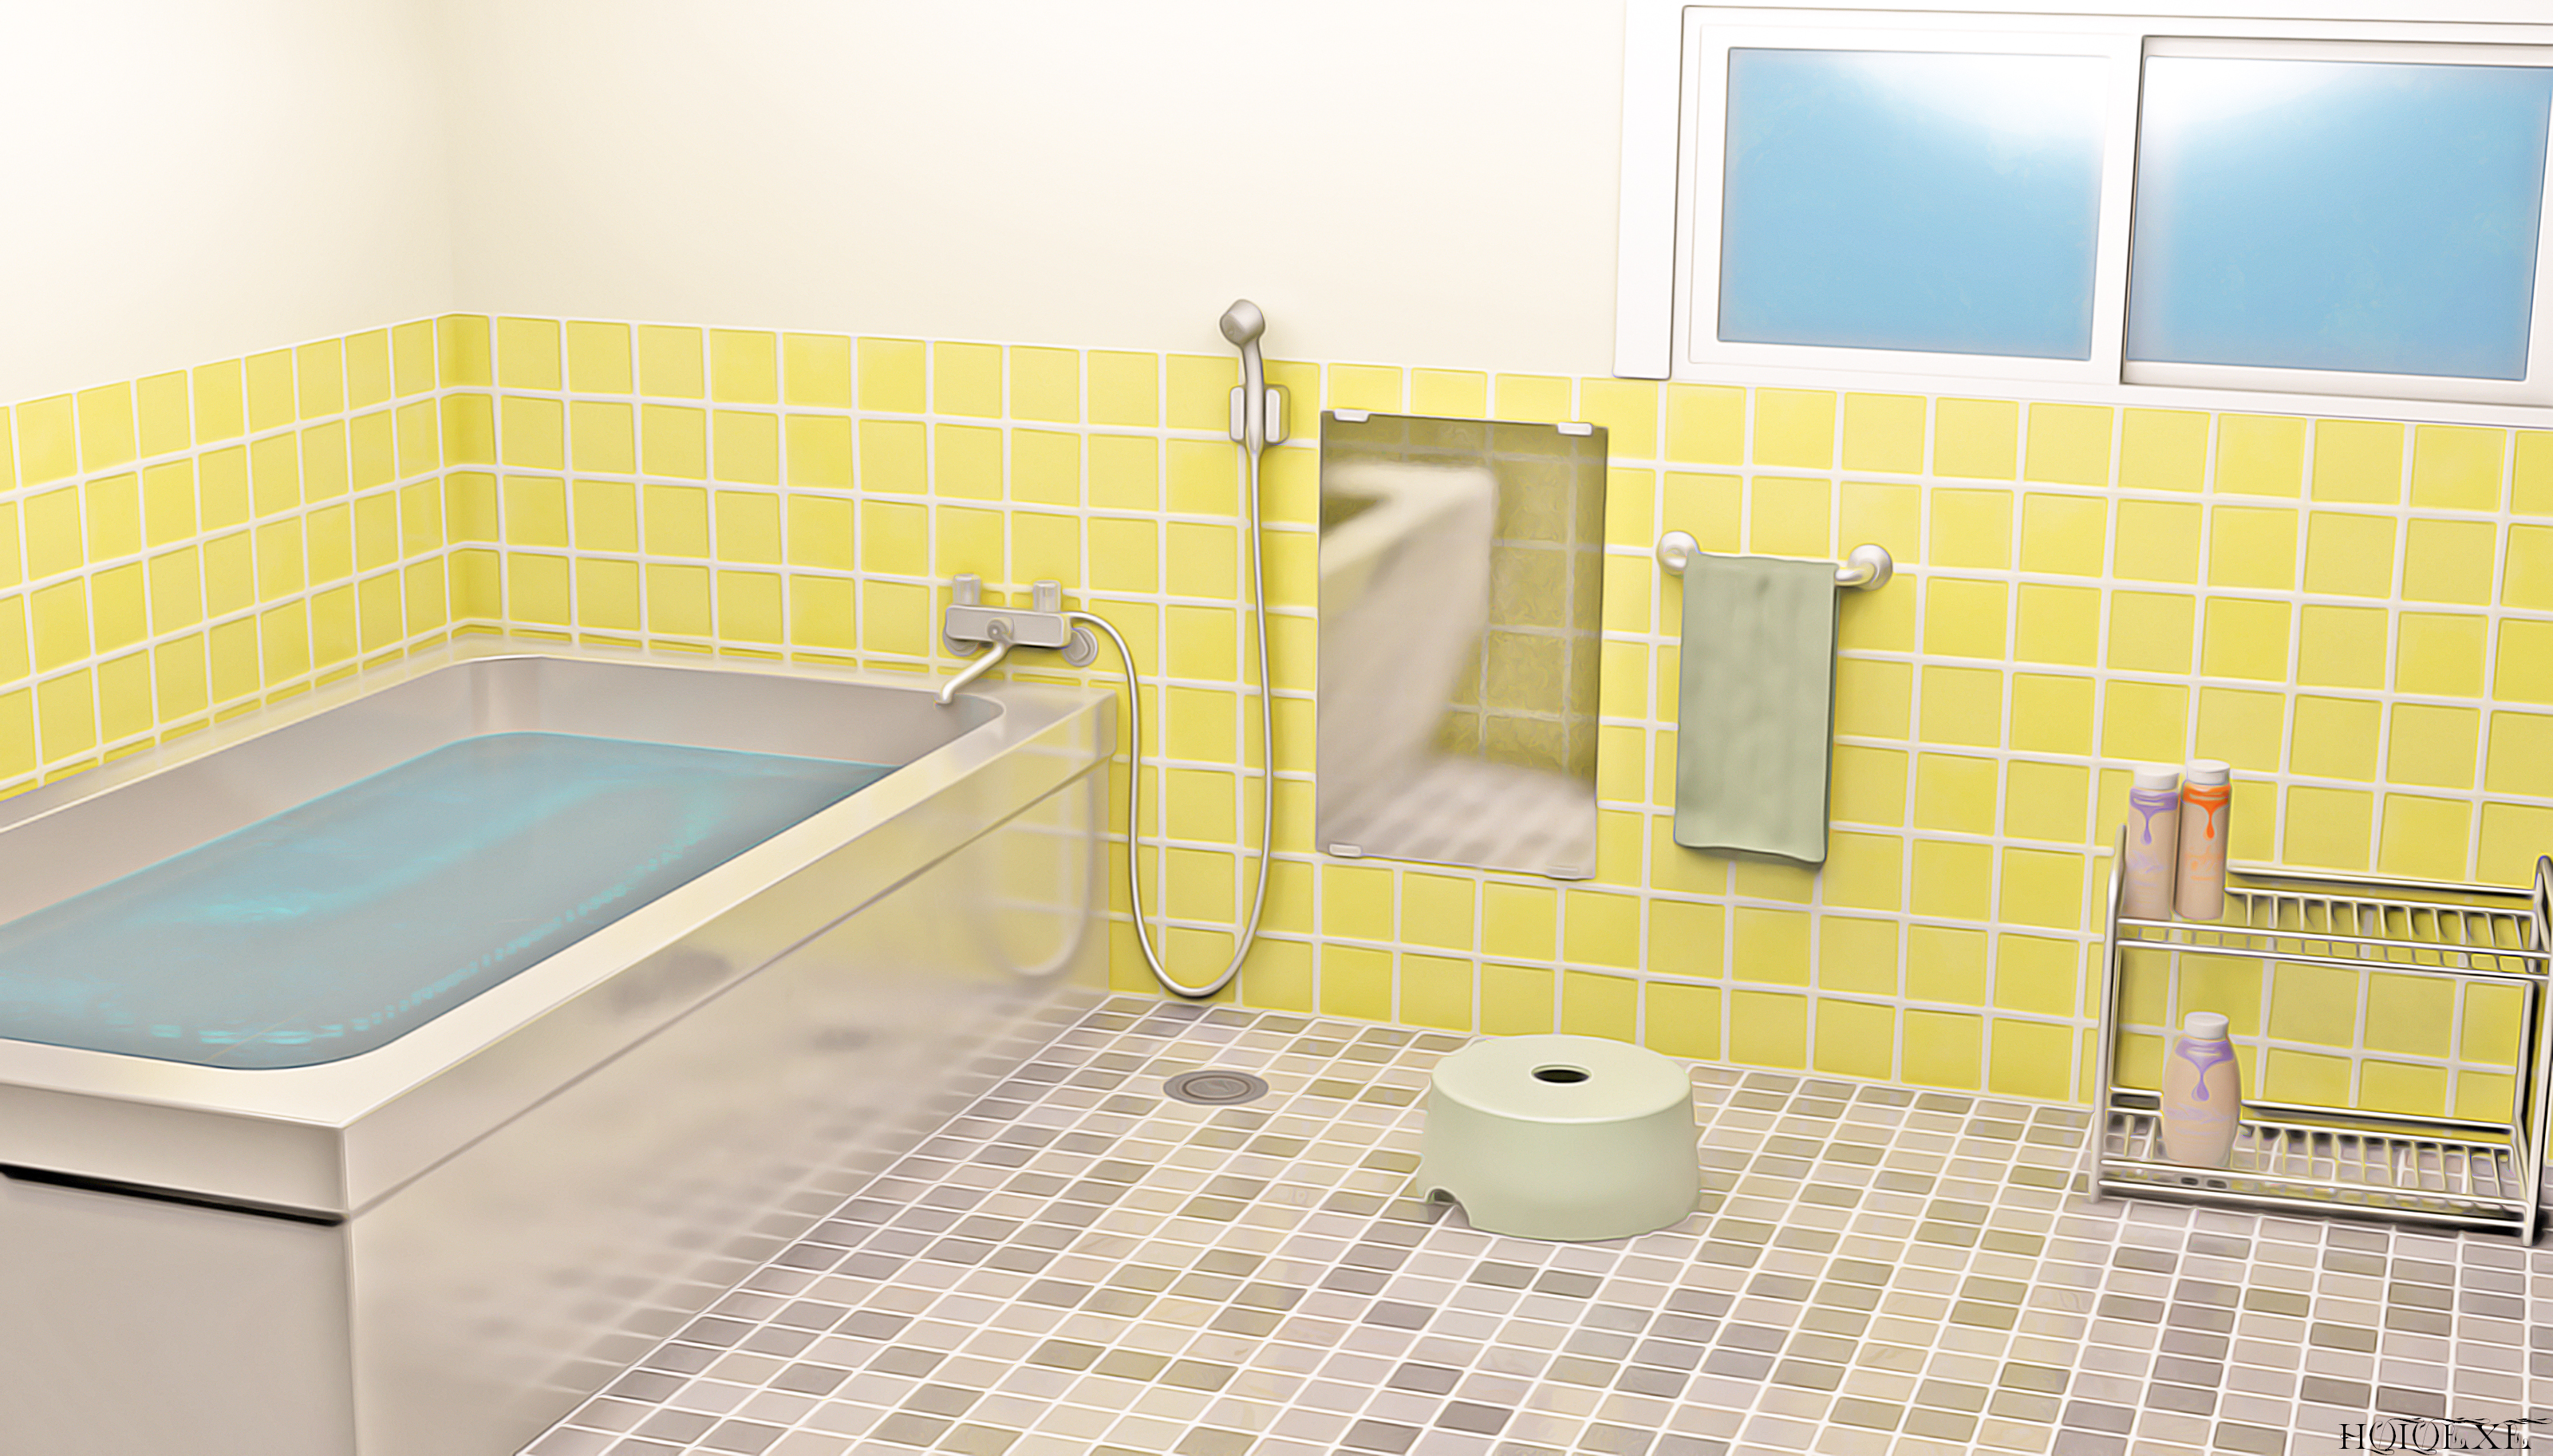 Simple Anime Bath Scene - P2 Download by HoloExe on DeviantArt